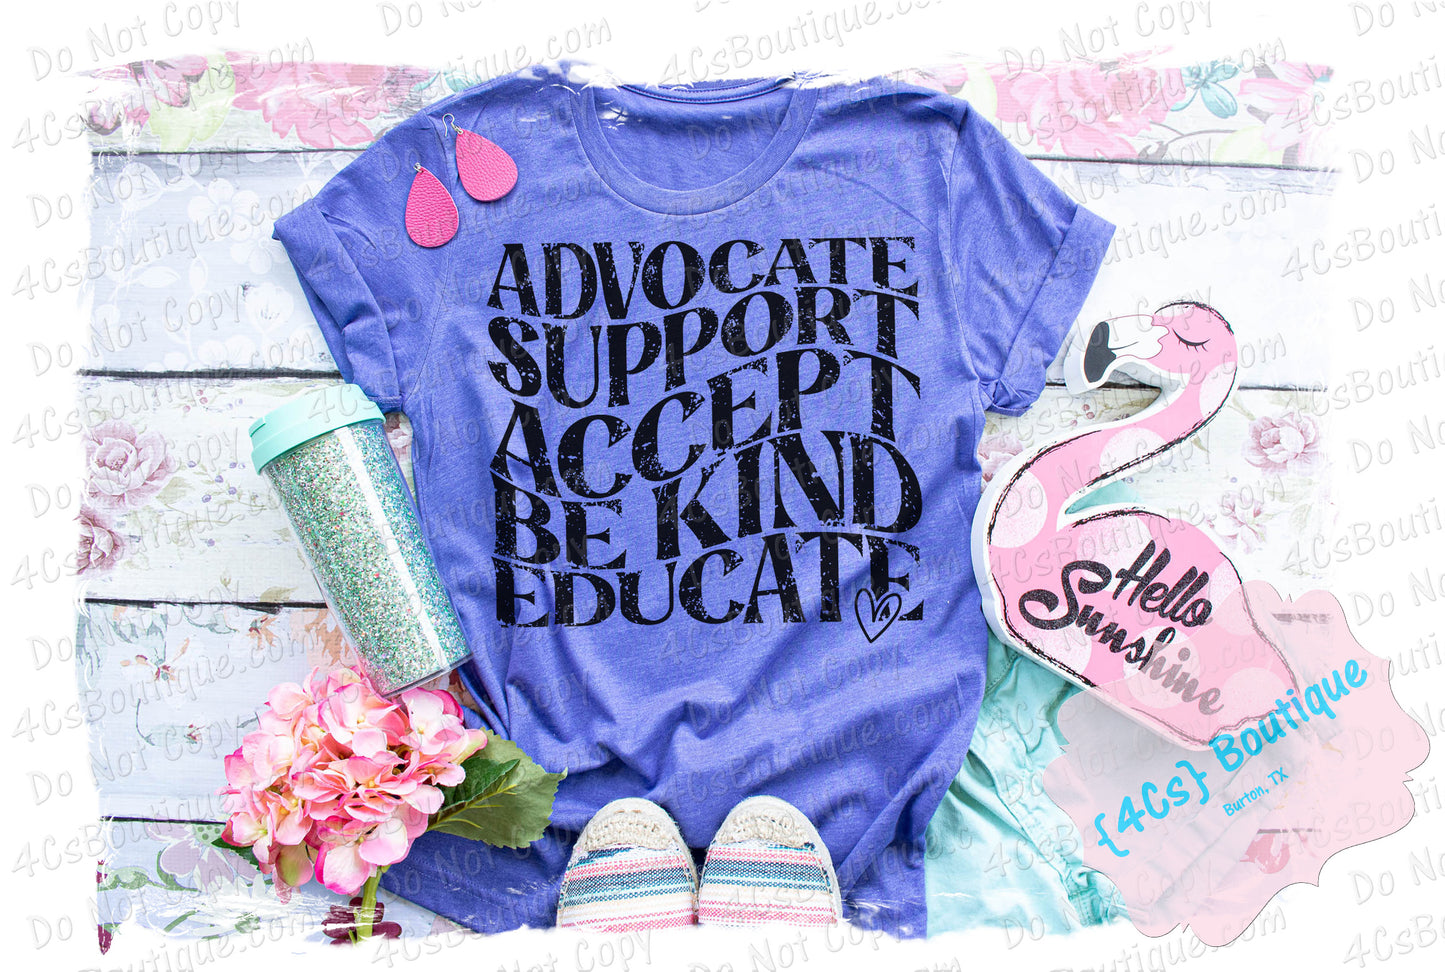 Advocate Support Accept Be Kind Educate